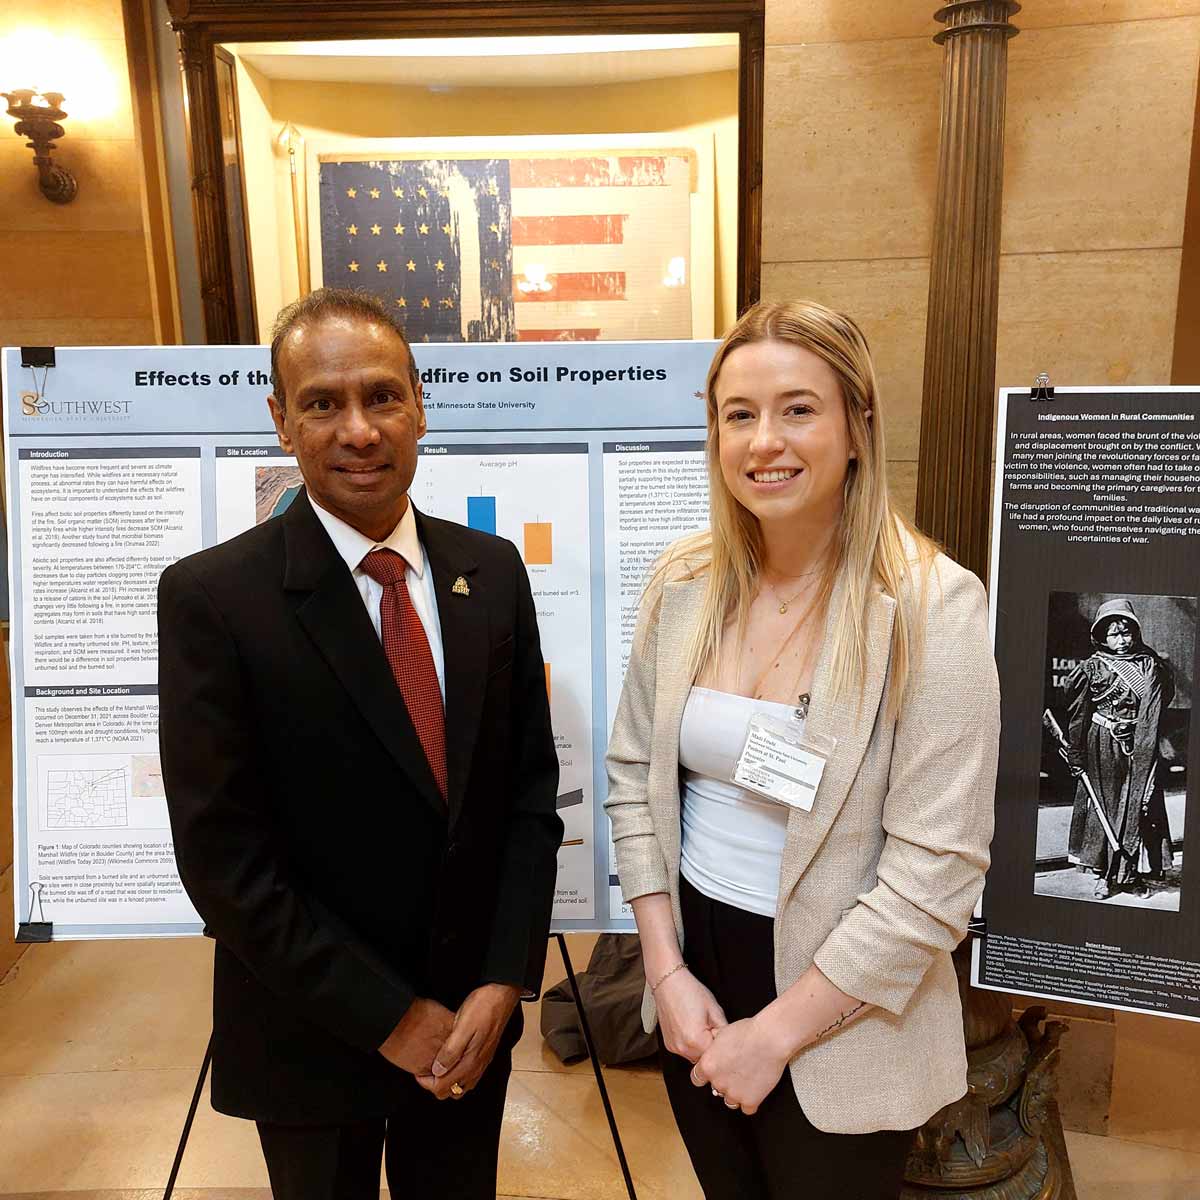 Six SMSU Students Participate in Posters at St. Paul Event Article Photo